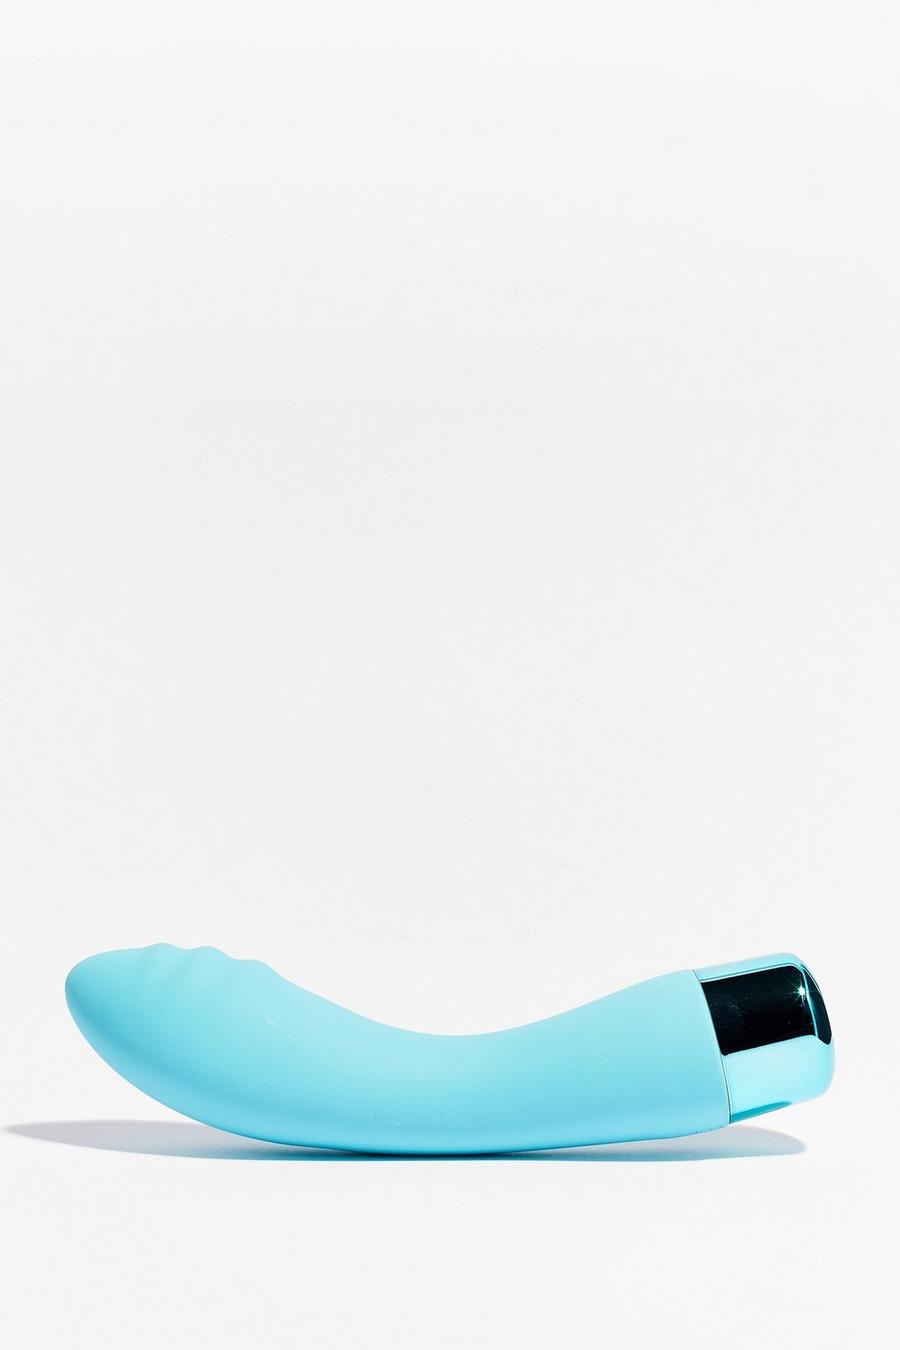 Ribbed Silicone 10 Functions Vibrator